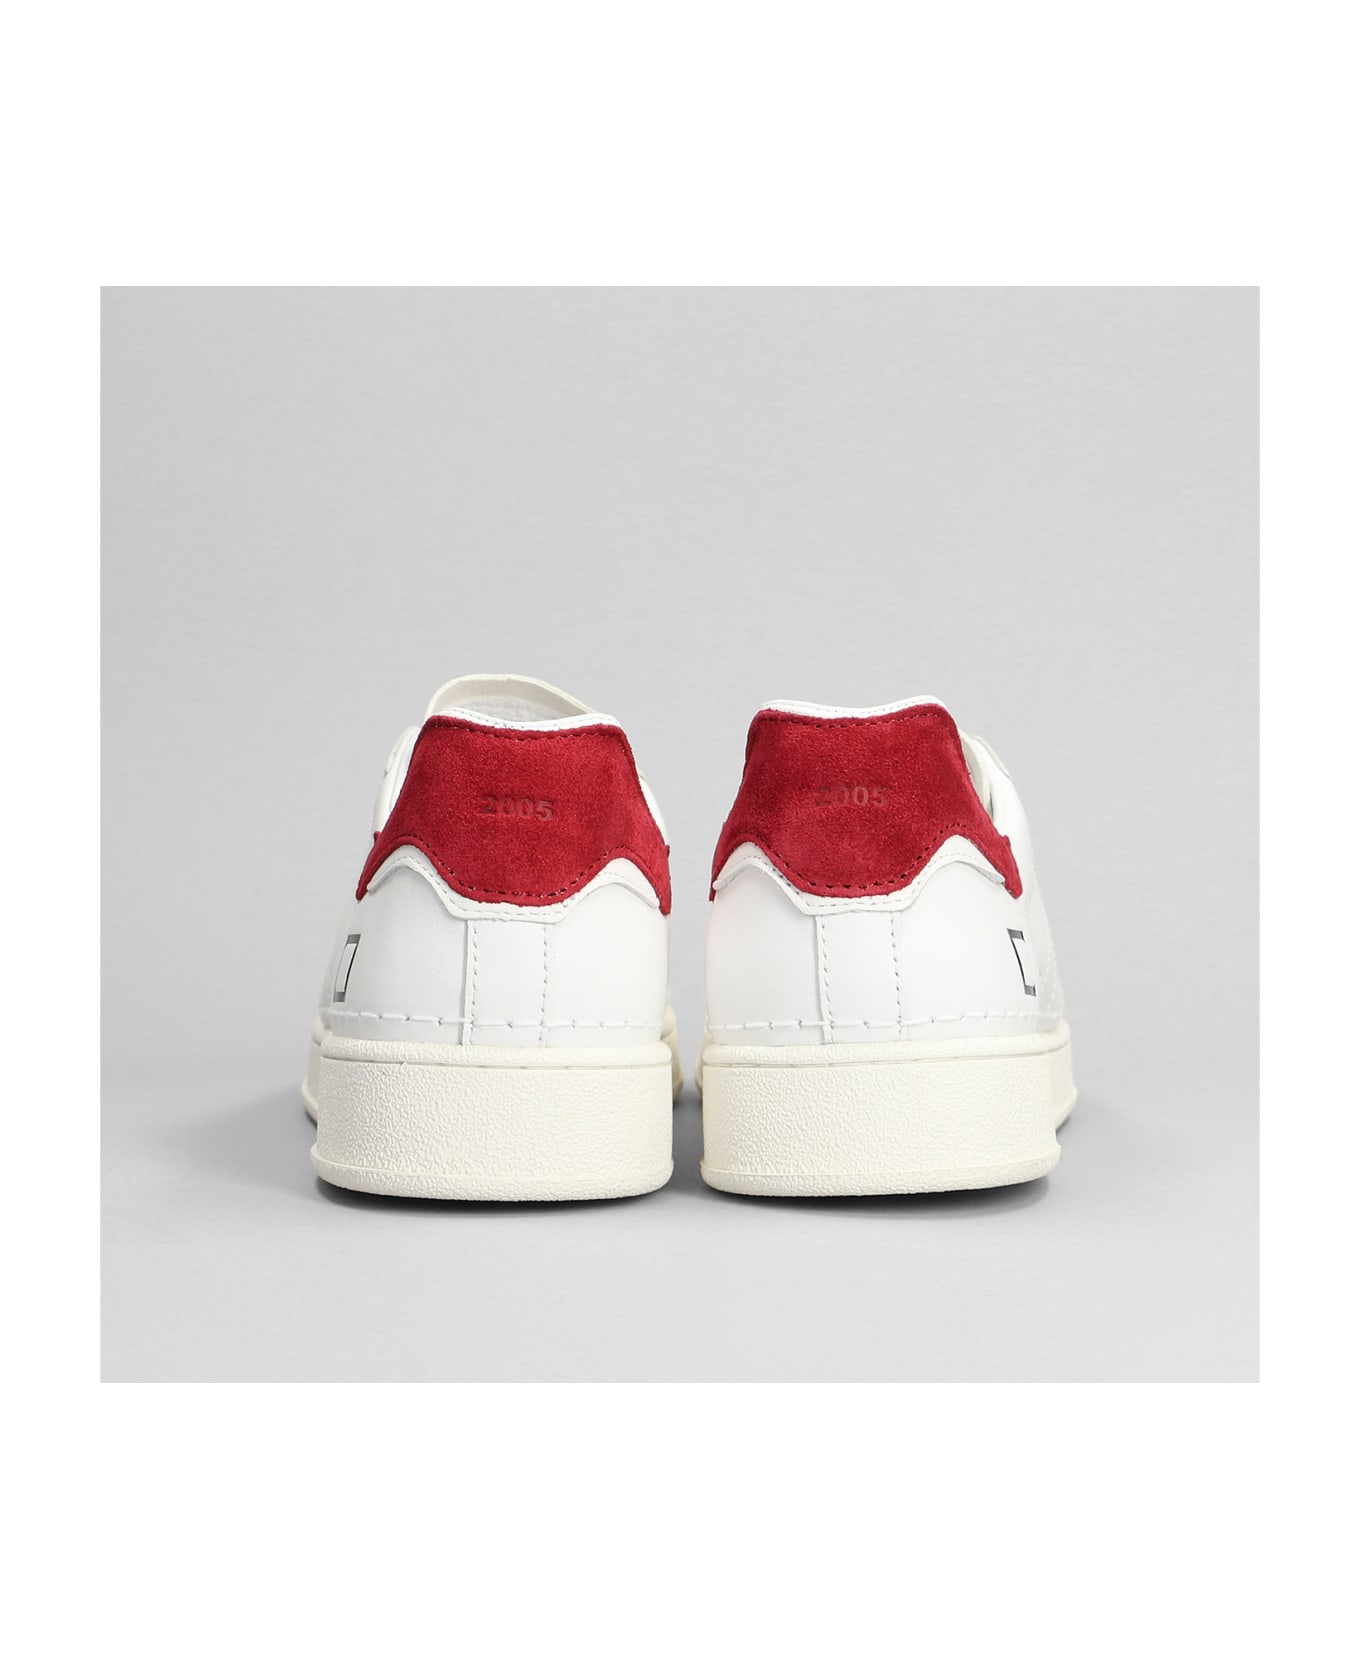 D.A.T.E. Base Sneakers In White Leather - white